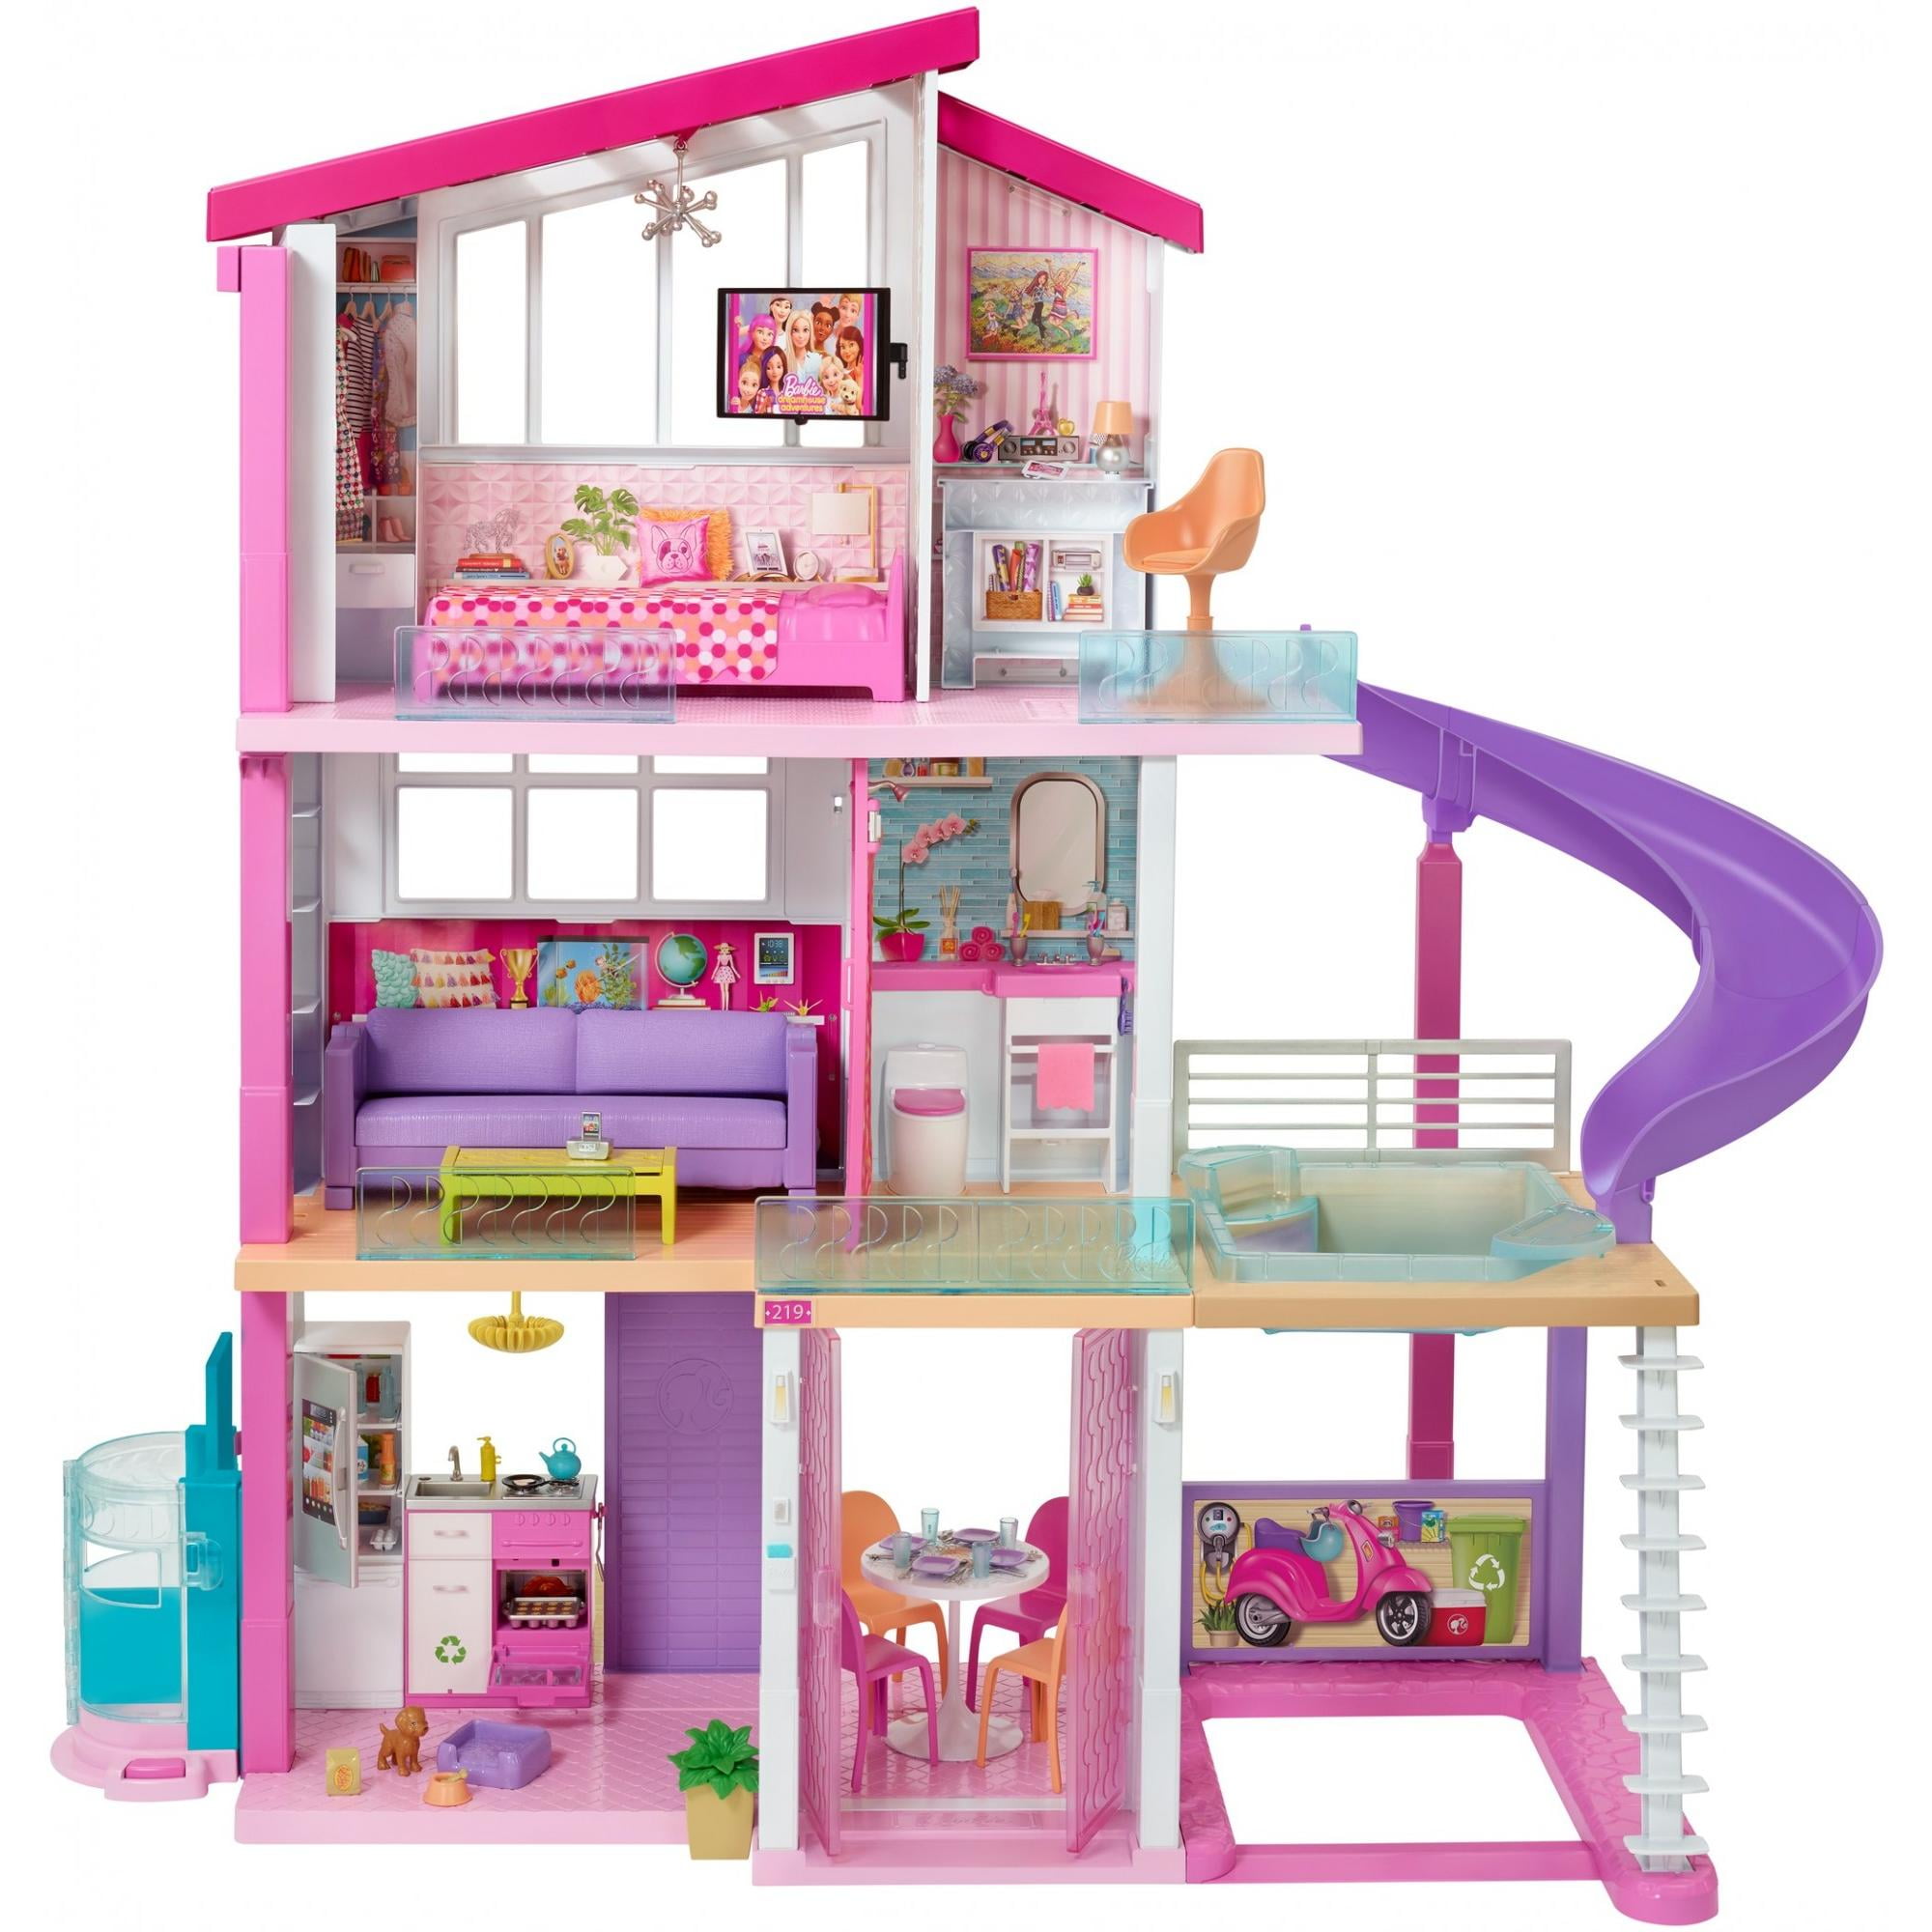 Barbie Dreamhouse 46.5 inch Dollhouse with Elevator, Pool, Slide and 70  Accessories Including Furniture and Household Items, Gift for 3 to 7 Year